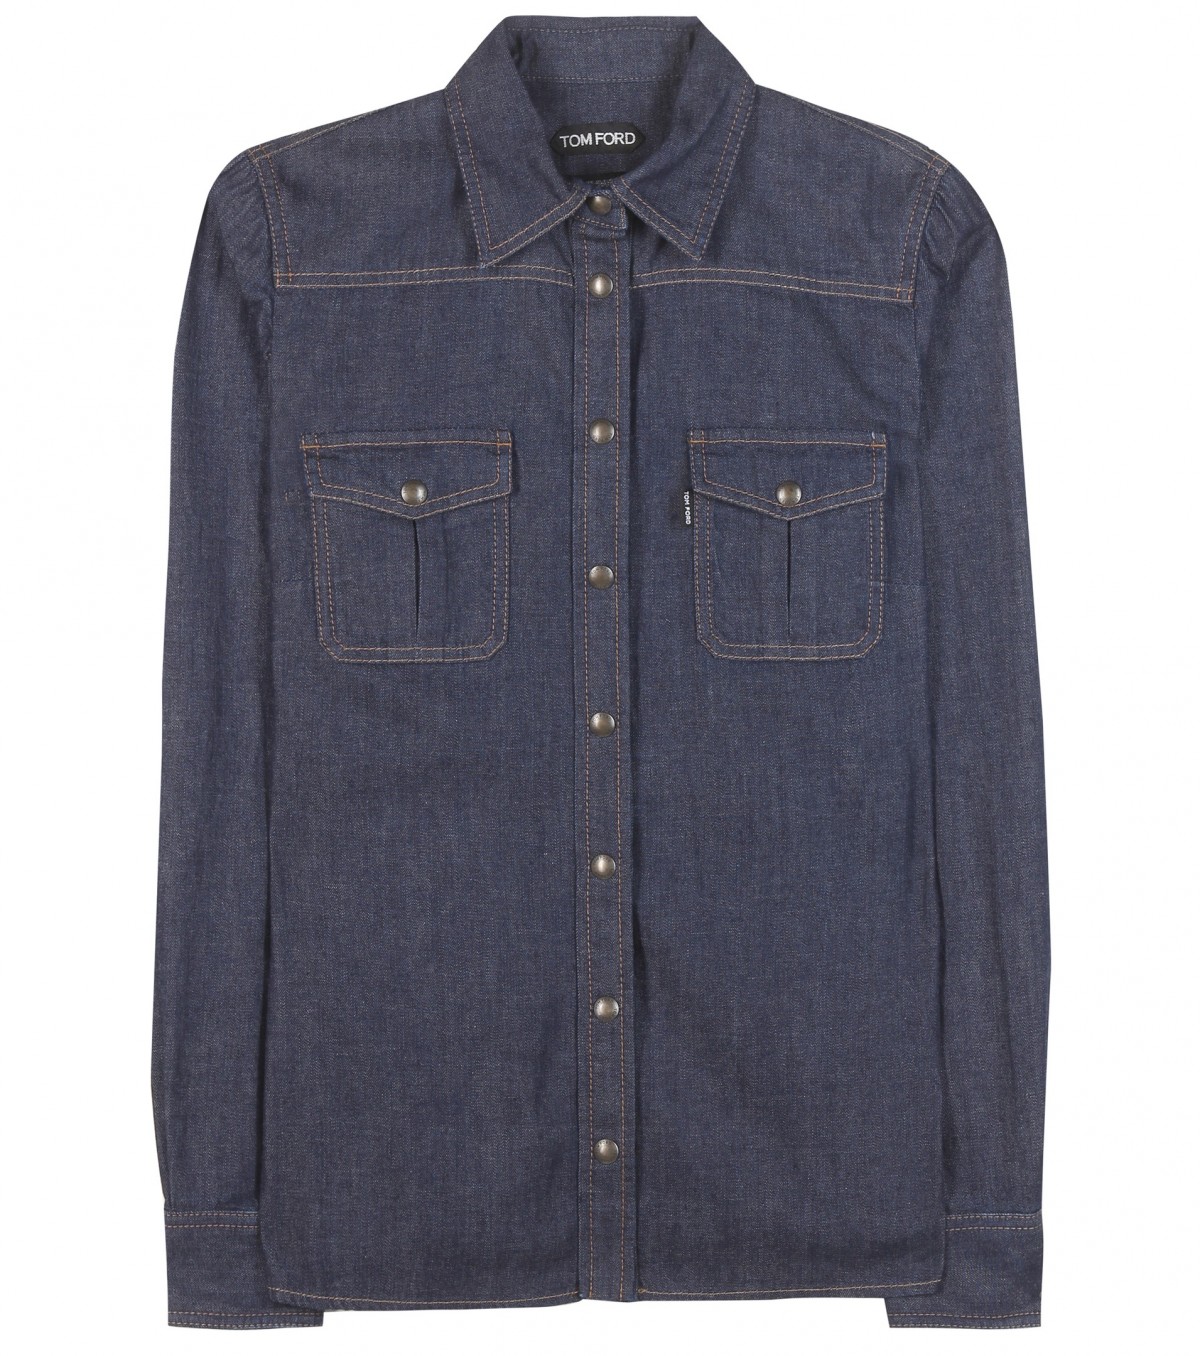 TOM FORD jeans camicia